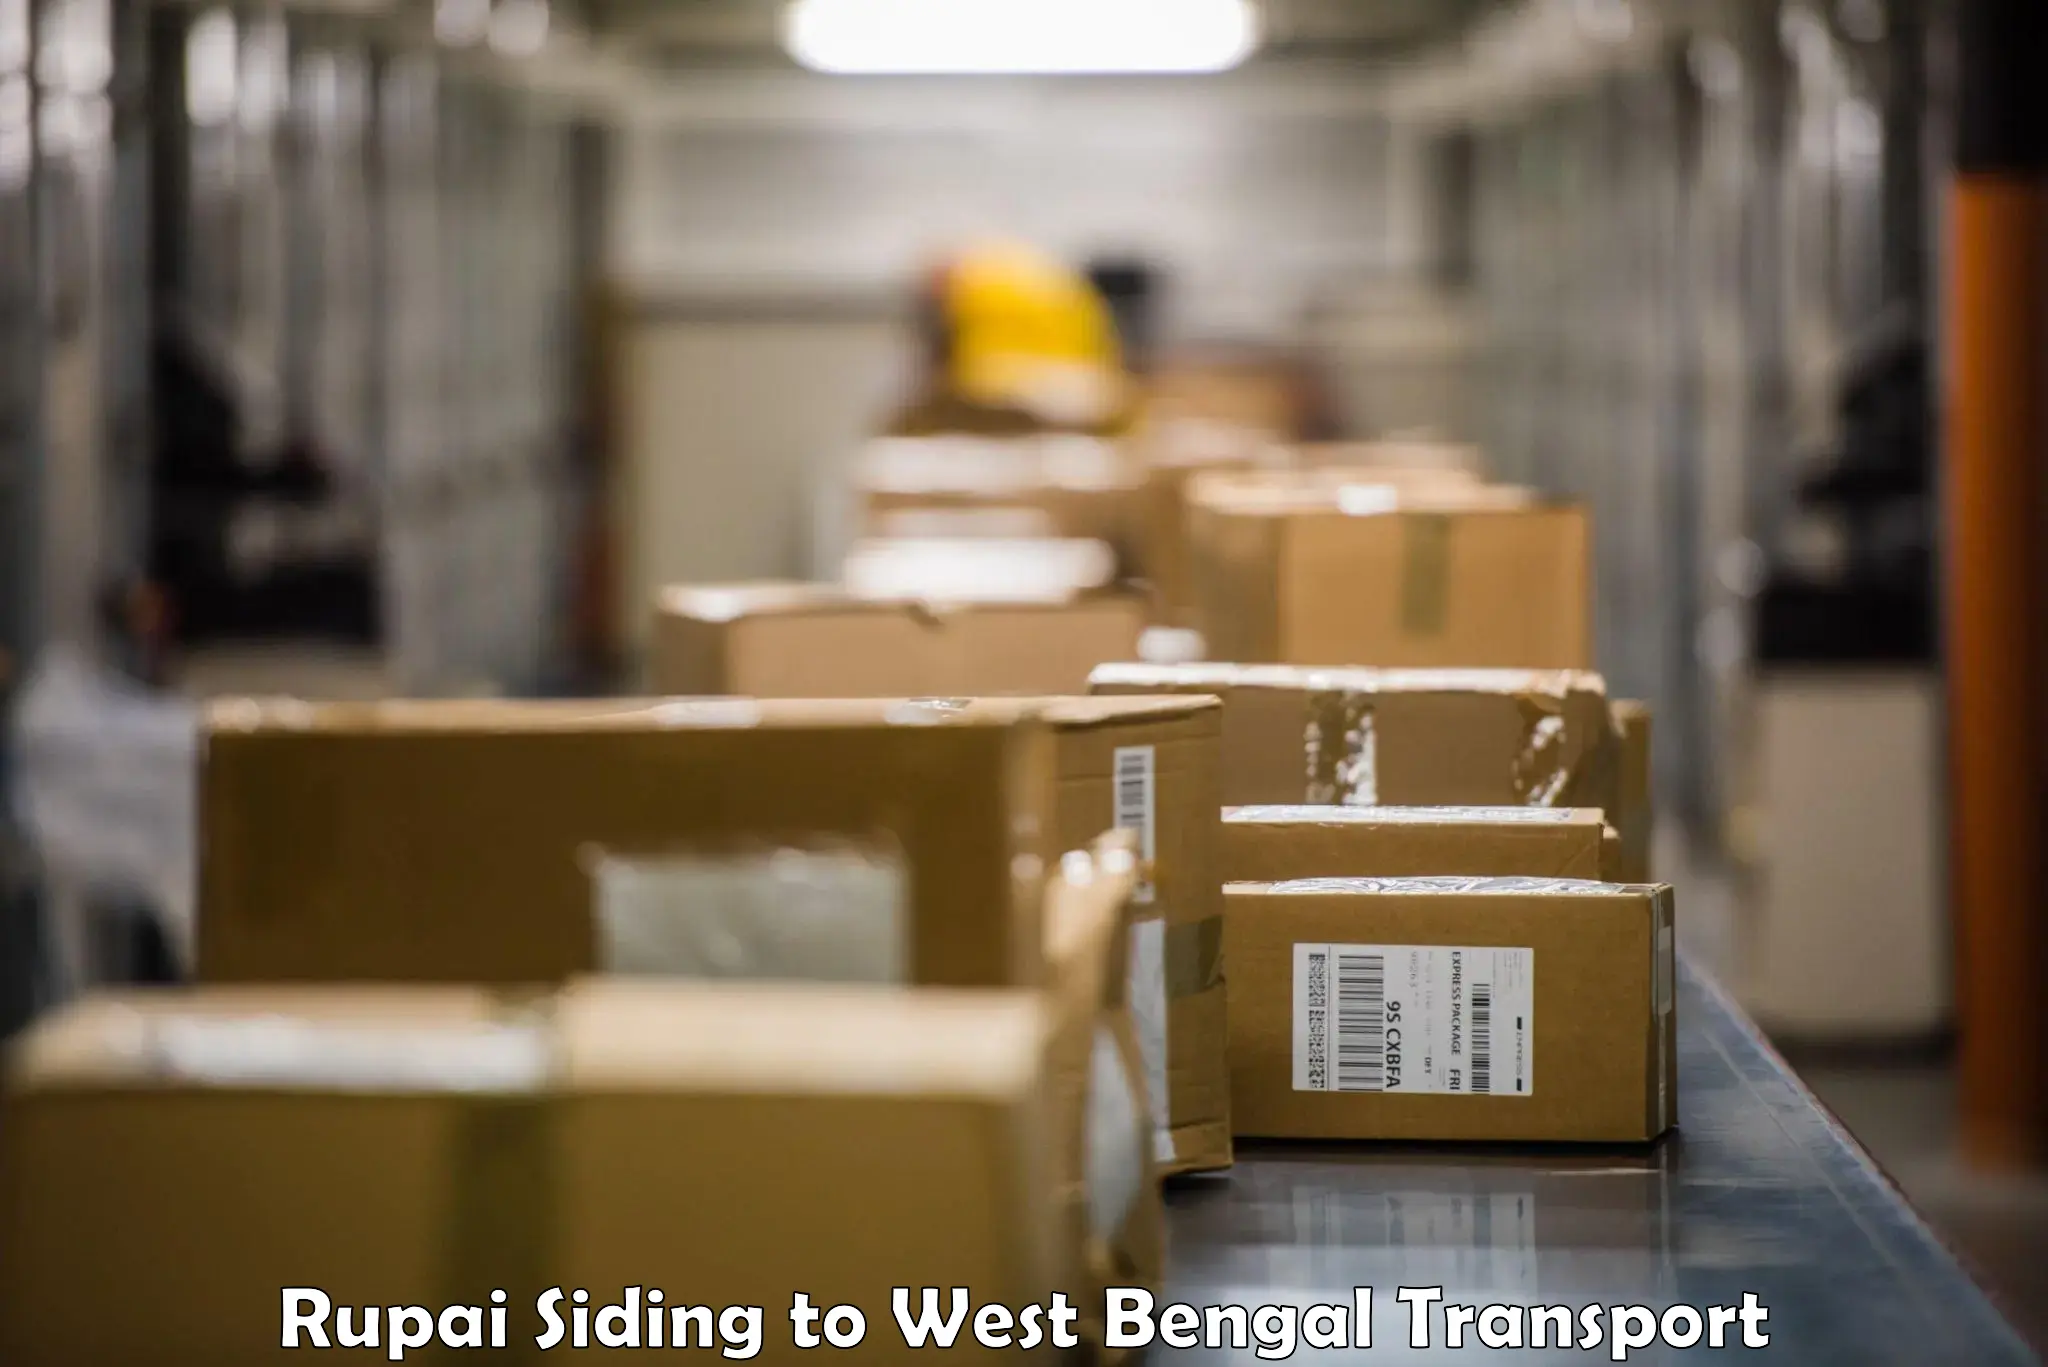 Express transport services Rupai Siding to Jhargram